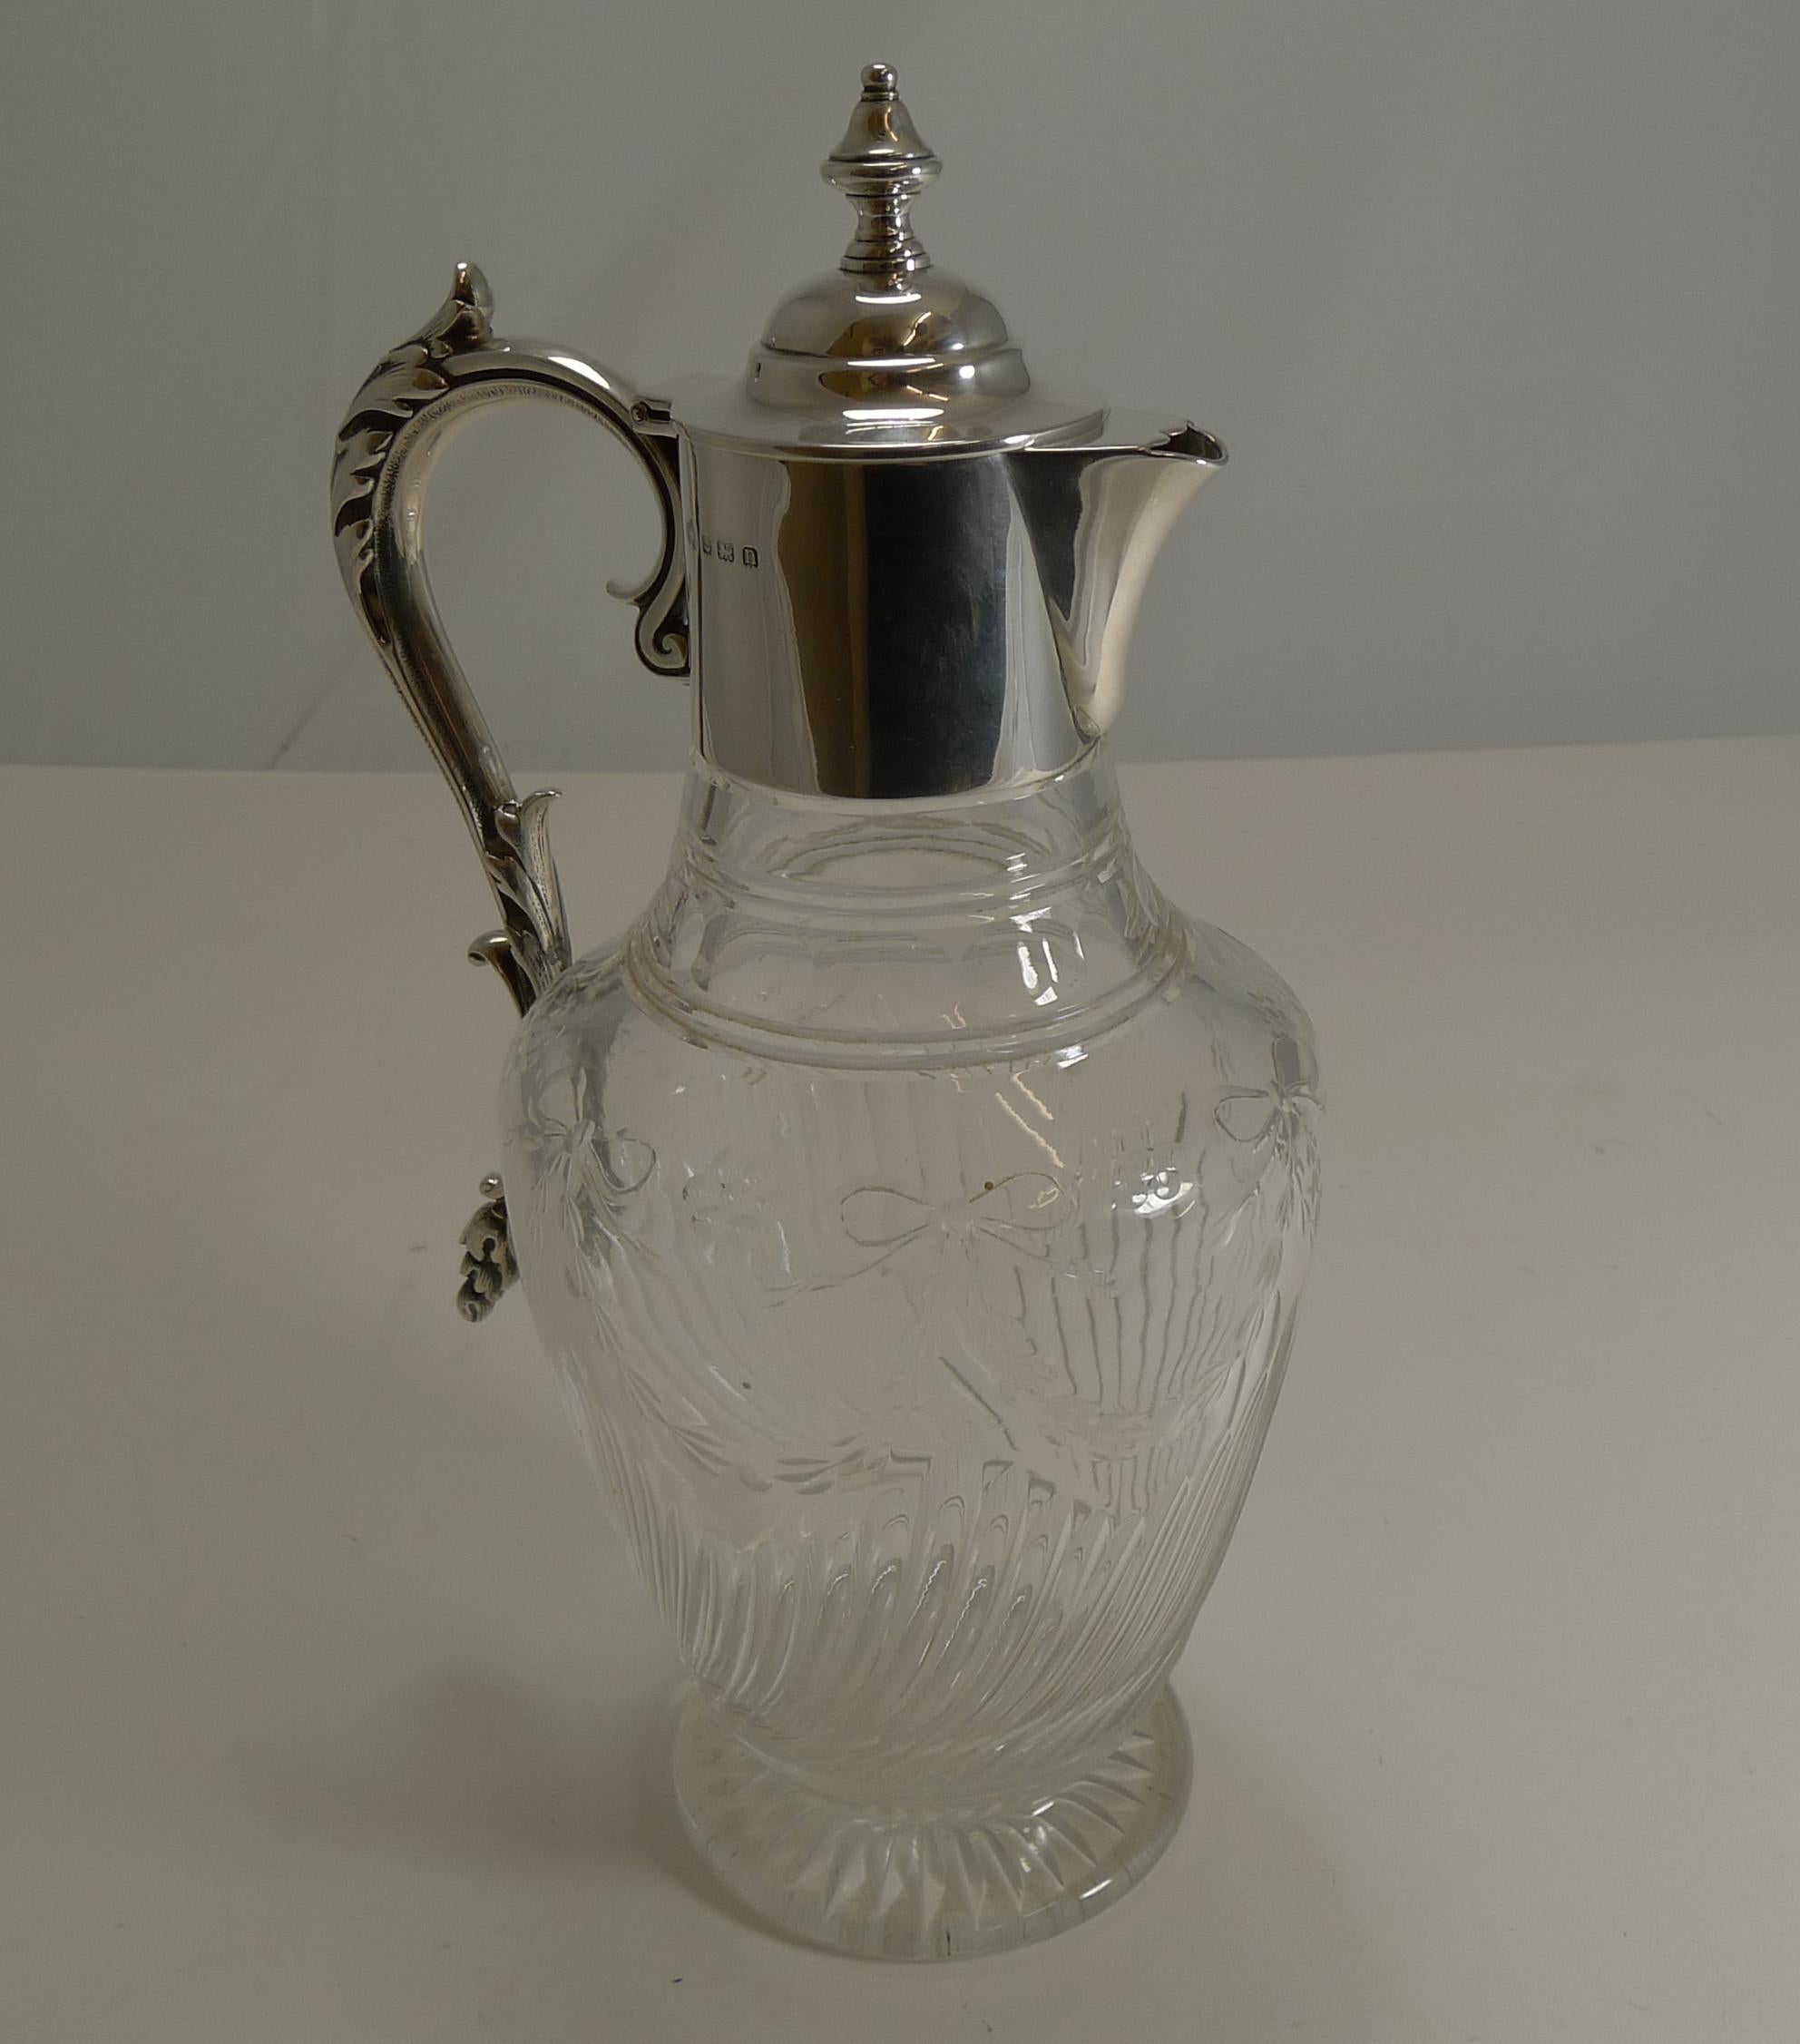 A fabulous antique crystal claret jug with the underside of the foot with a star cut. The body of the jug has long diagonal channel cuts and above this, a very pretty ribbon and bow continuous garland.

The fittings are all solid English sterling